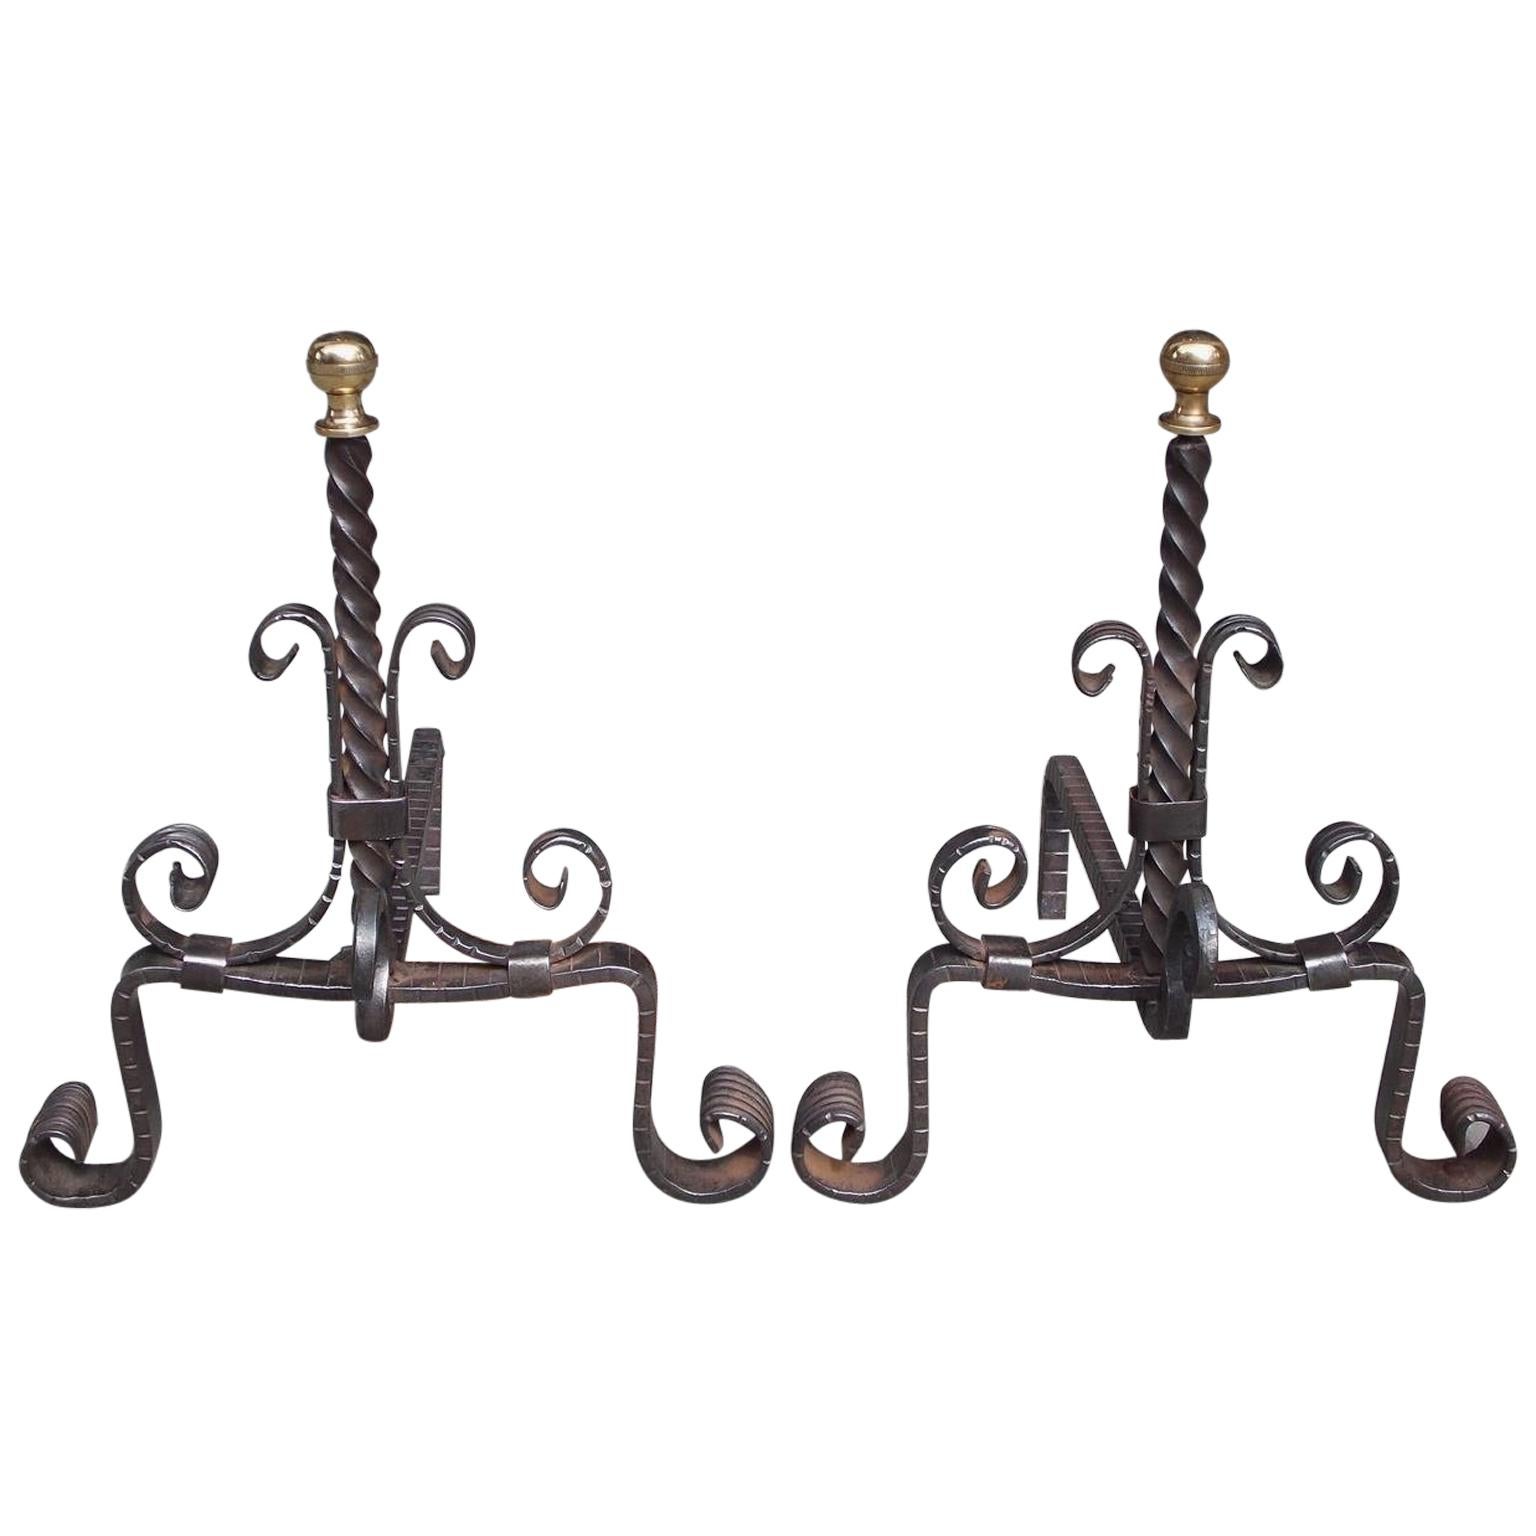 Pair of American Wrought Iron and Brass Ball Top Diminutive Andirons , C. 1840  For Sale